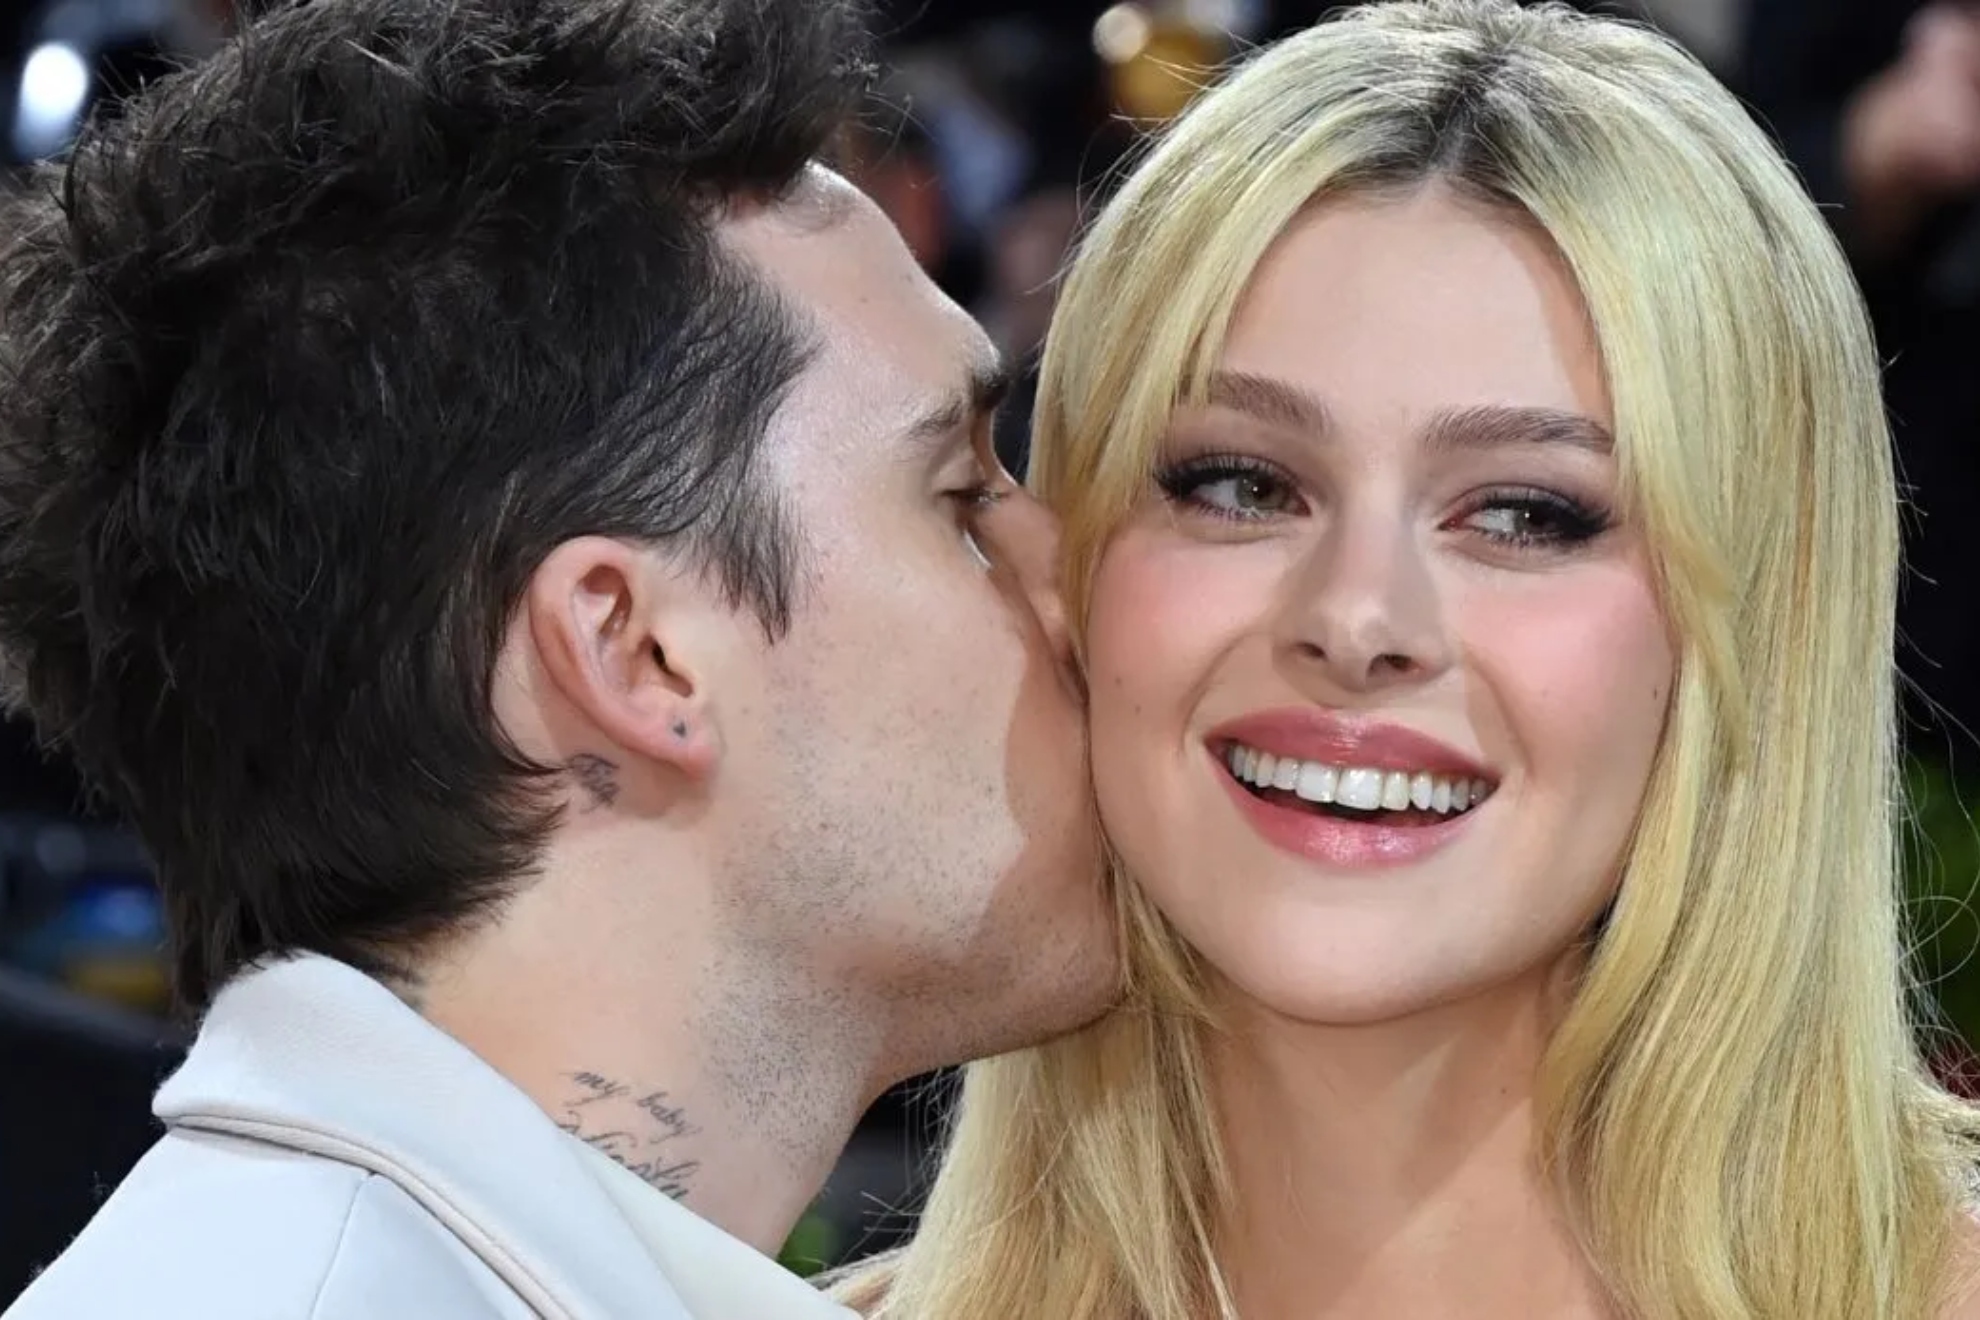 Nicola Peltz shares cryptic post about 'tears she cried in 2022'